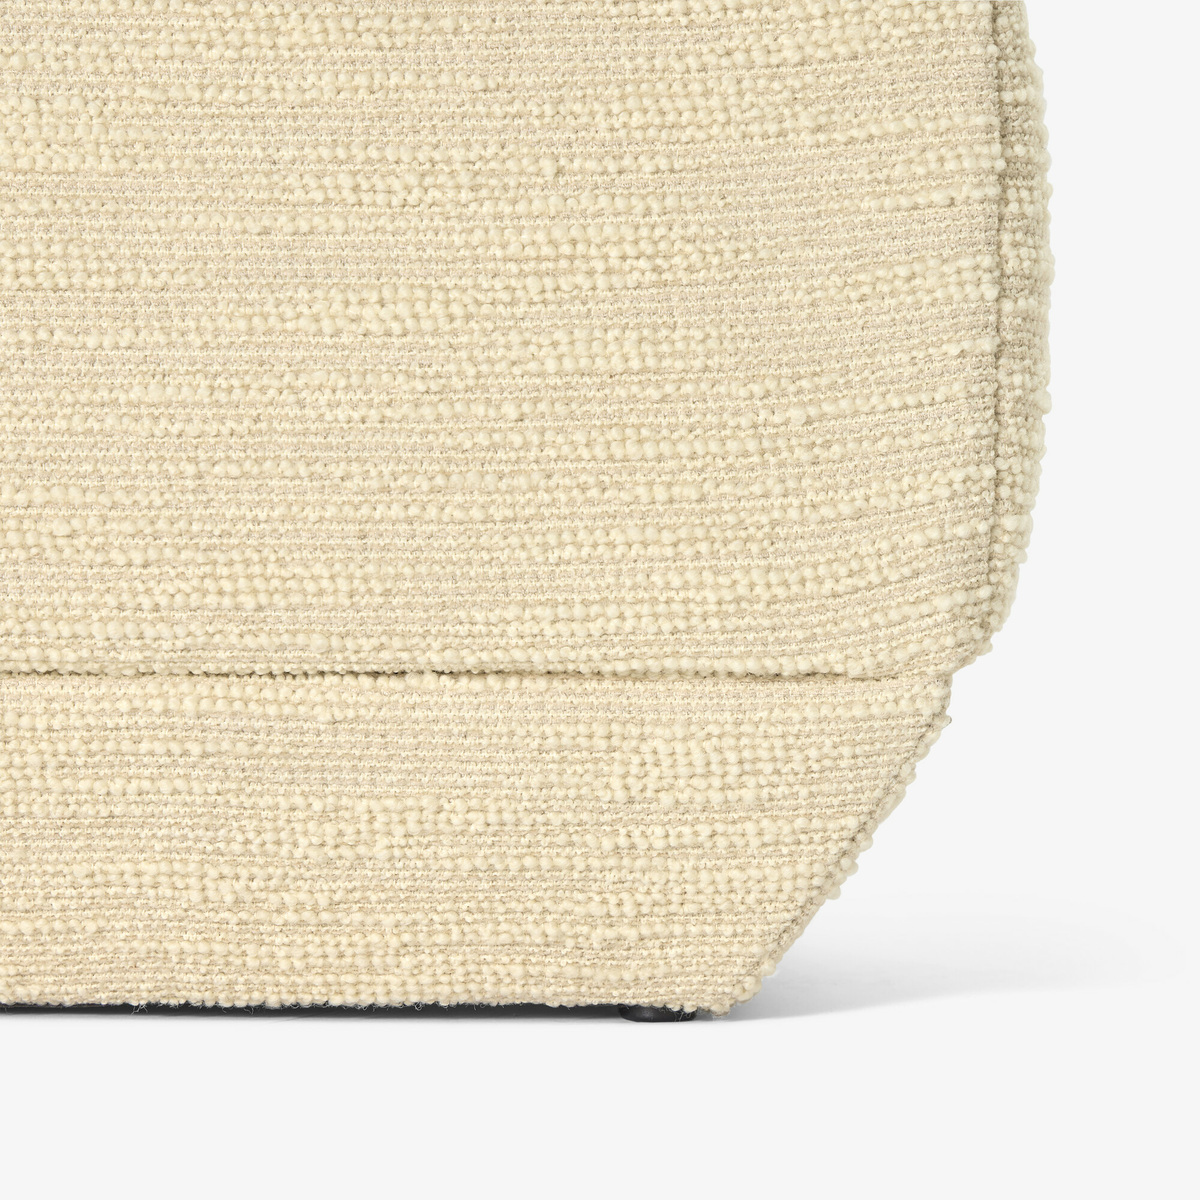 Chill Armchair, Off-White - Curl fabric - image 6